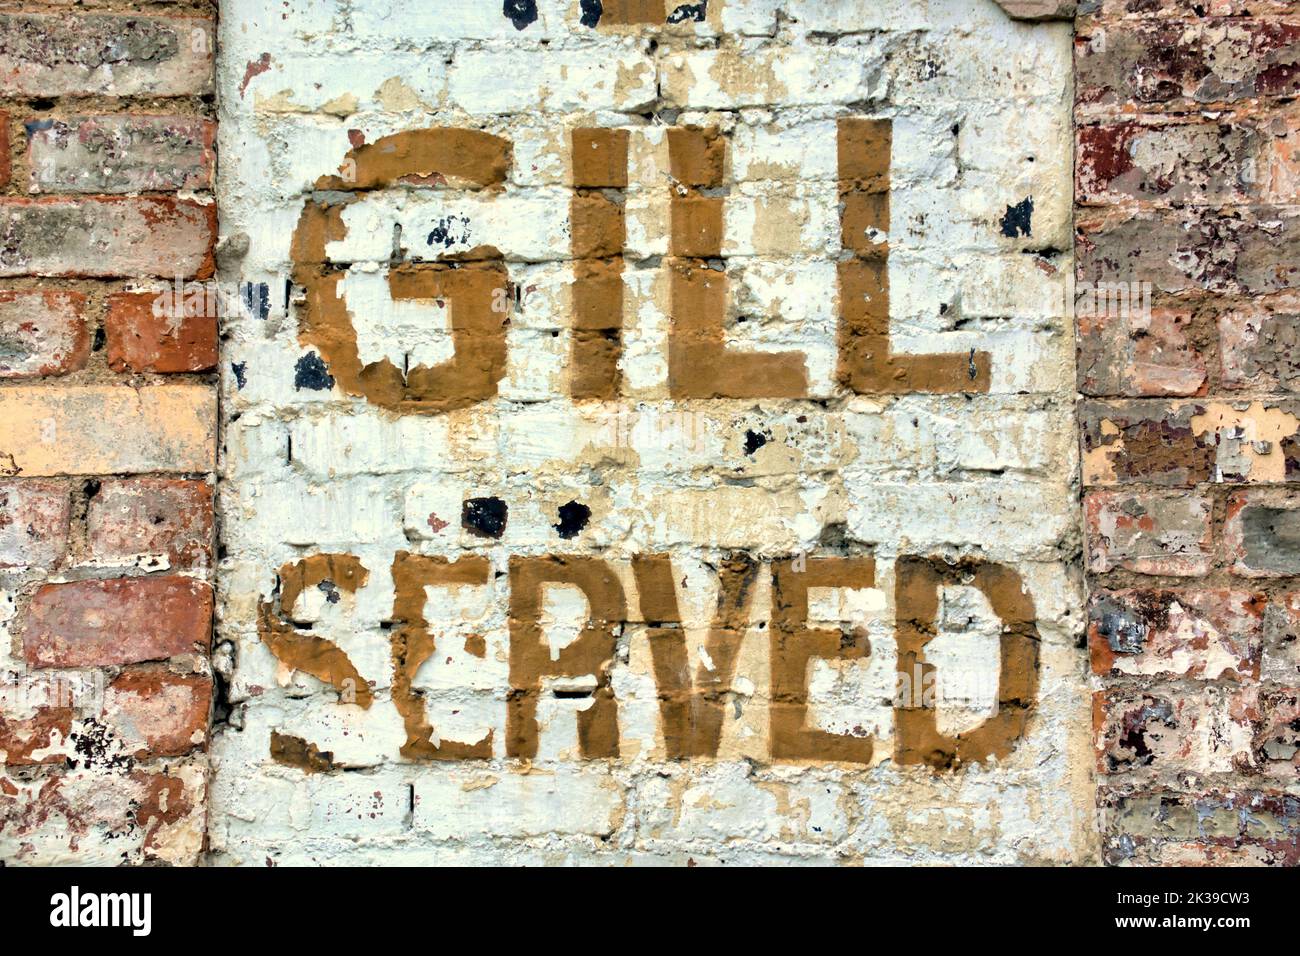 old pub wall alcohol sign advertising full gill measure of whisky  Glasgow, Scotland, UK Stock Photo